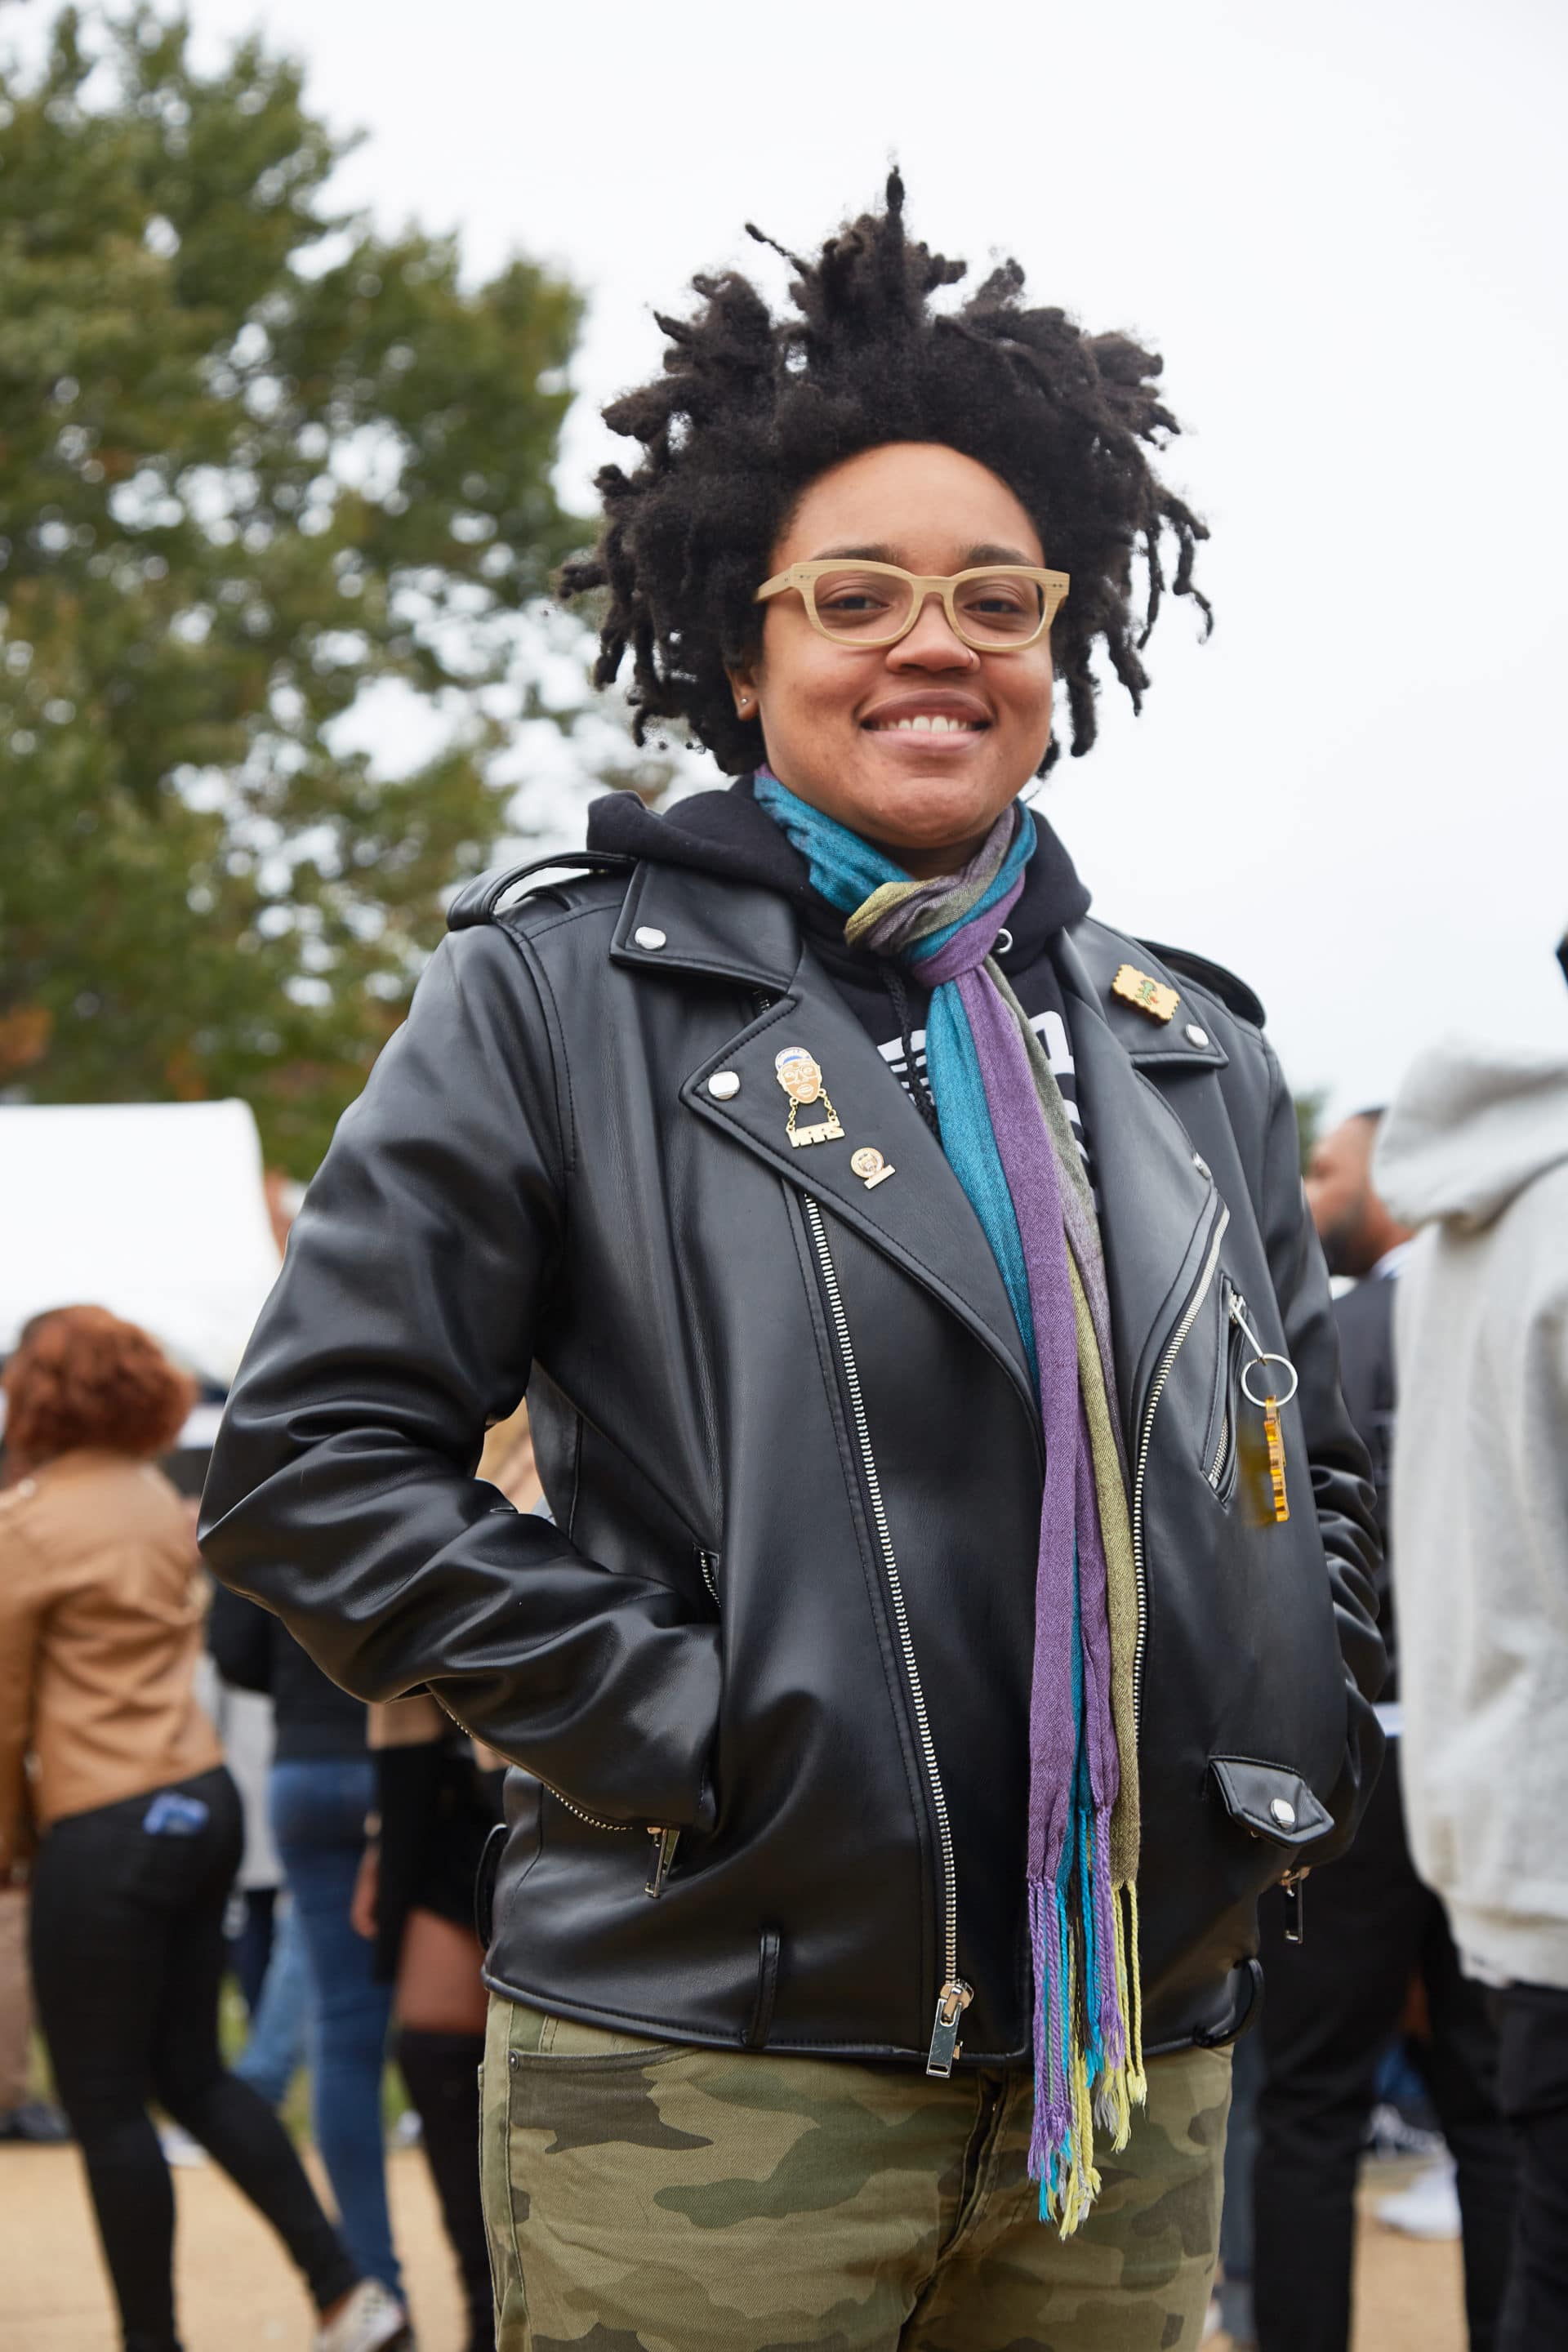 These Street Style Outfits Stormed The Yard At Howard’s Homecoming